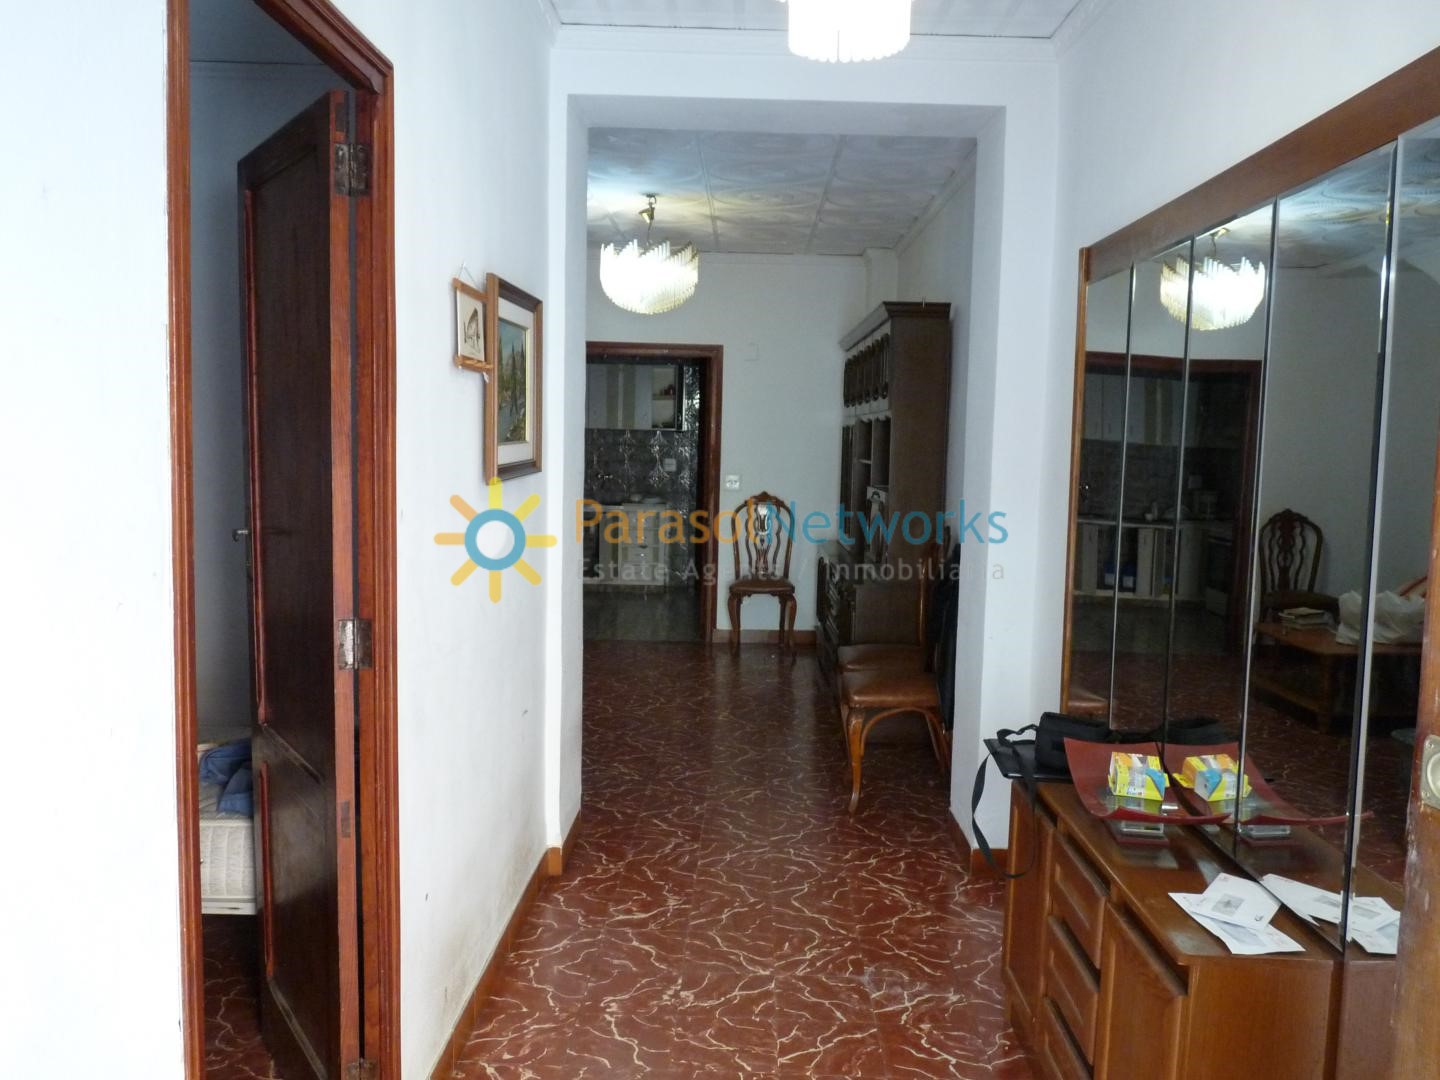 House for sale in Oliva – Ref: 1938